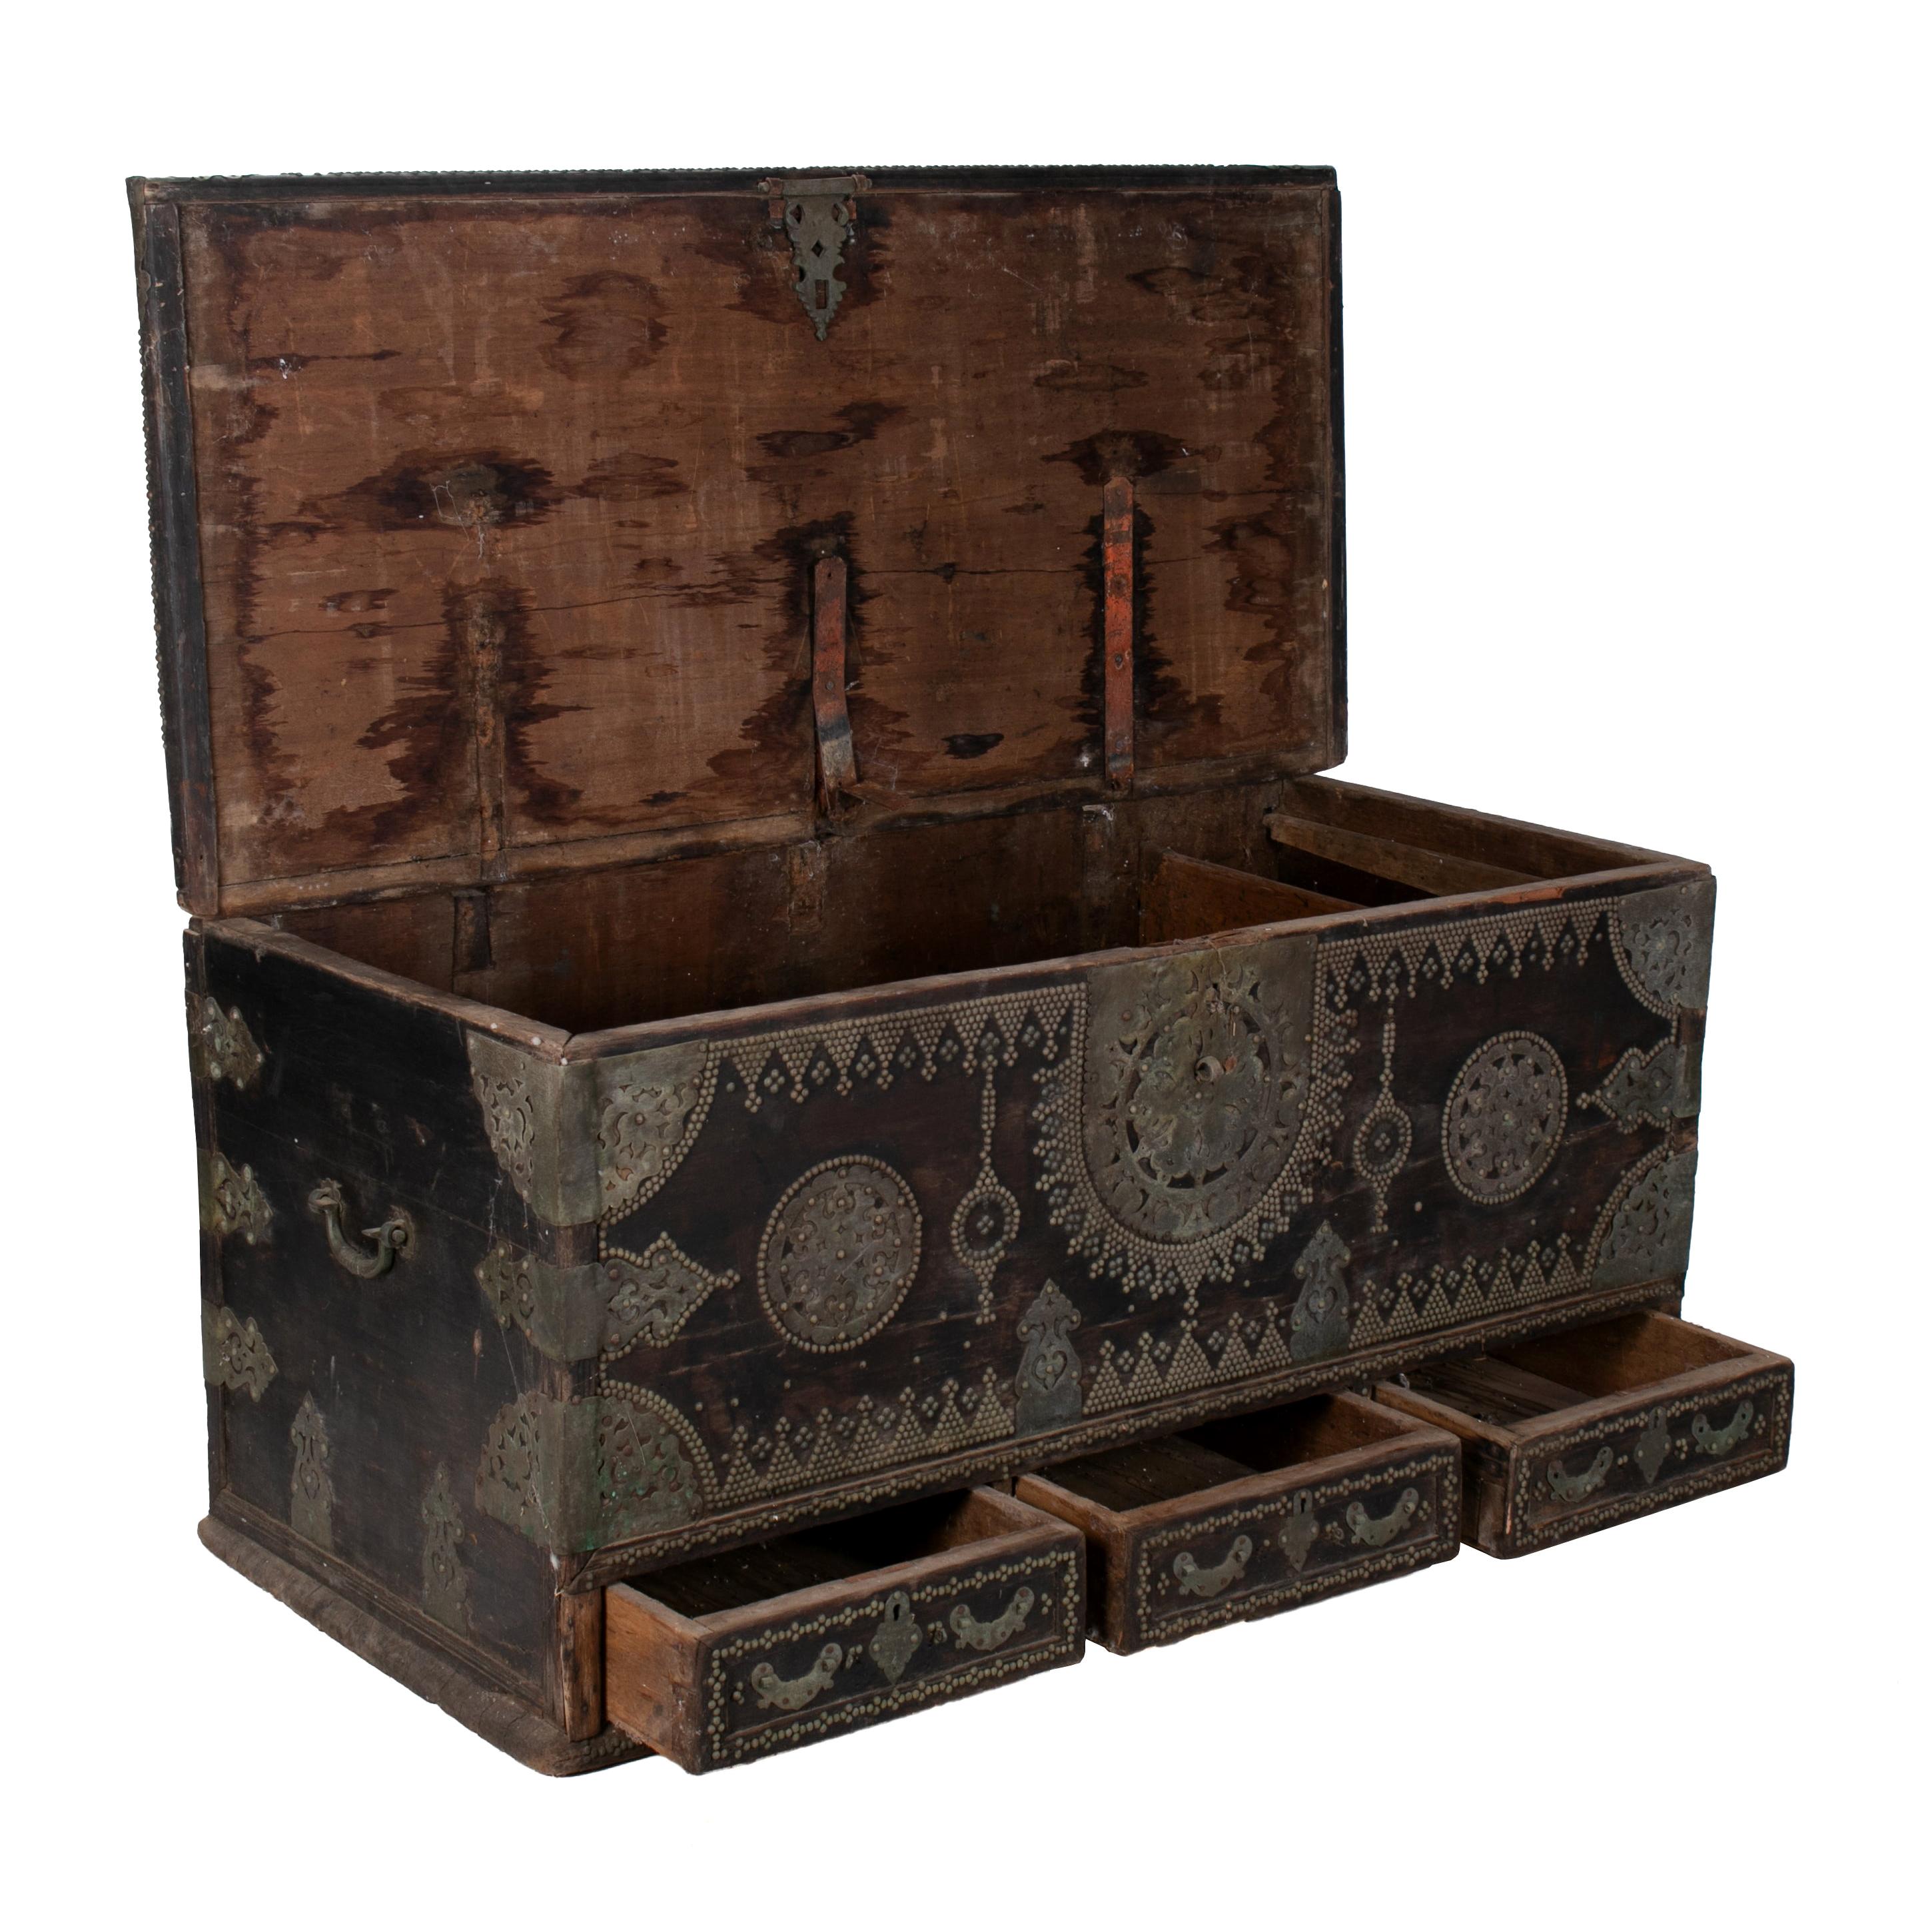 19th Century Turkish Wooden Trunk with Bronze Decorations and Fittings